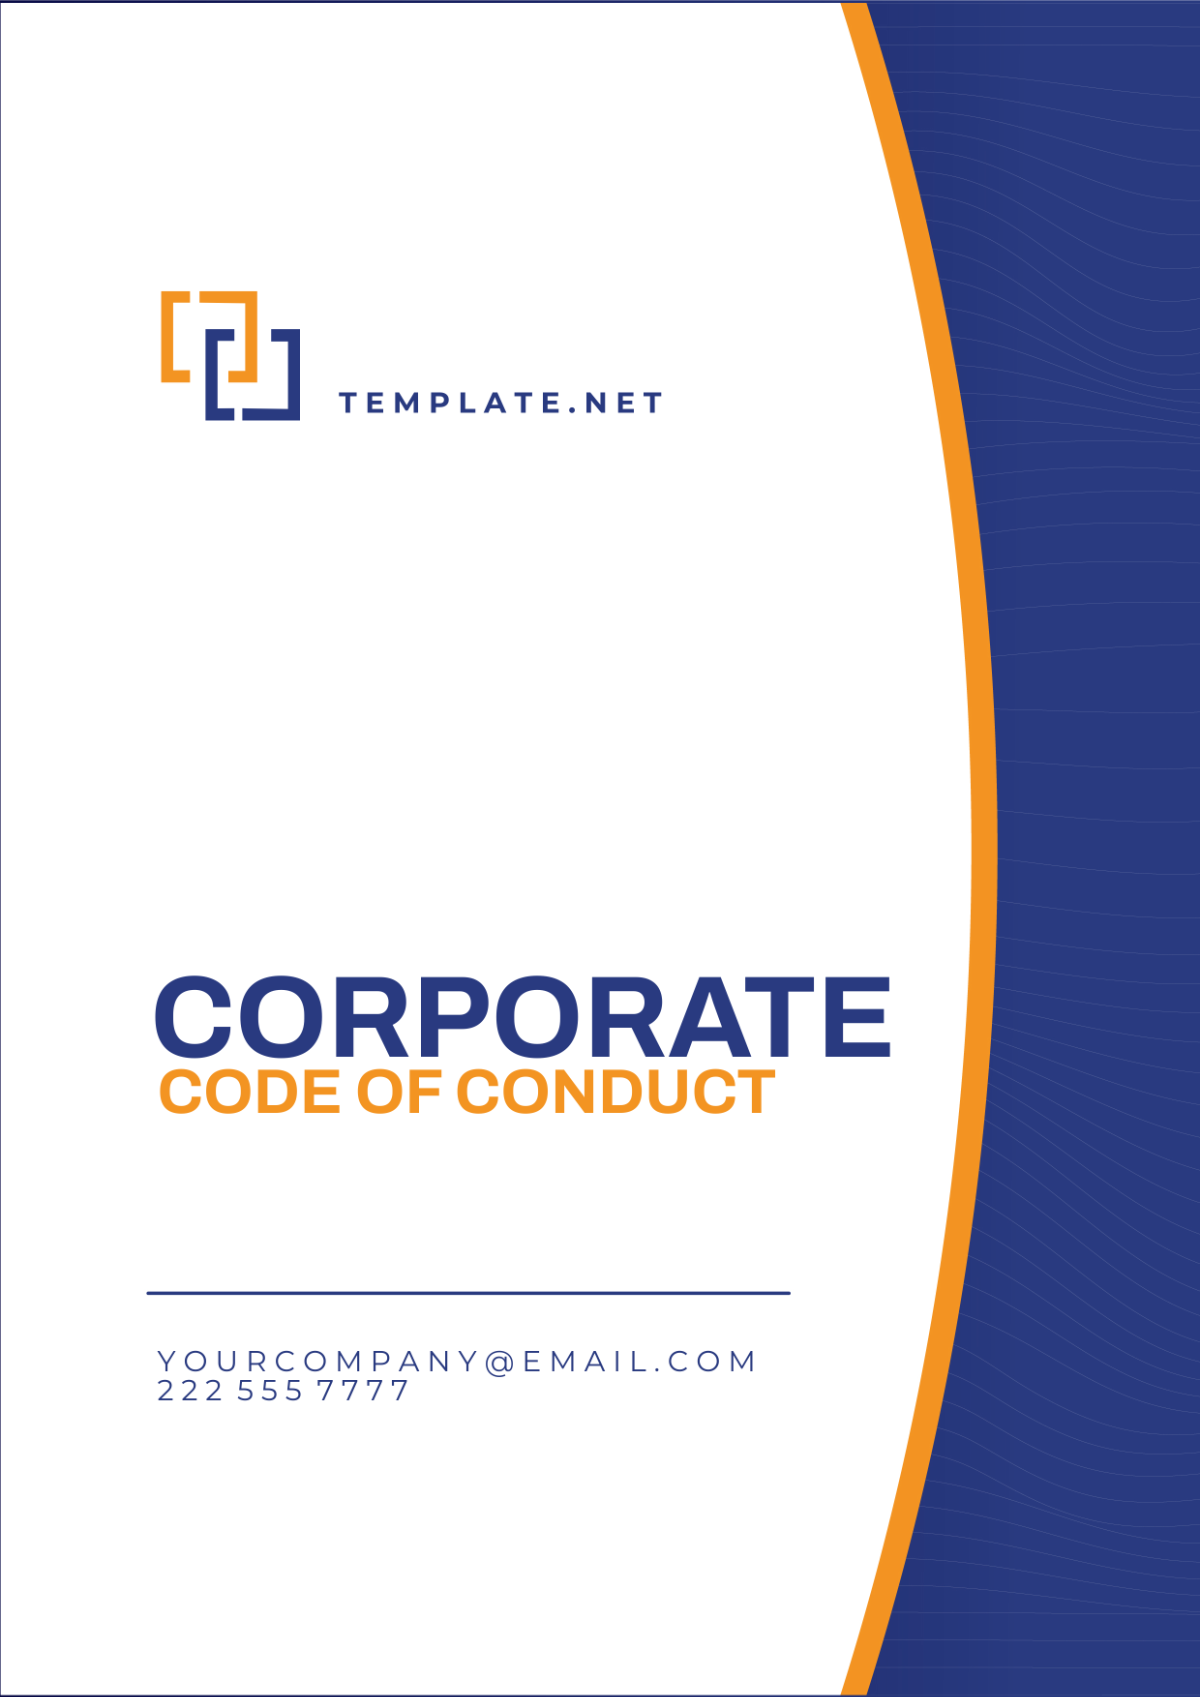 Corporate Code of Conduct Template